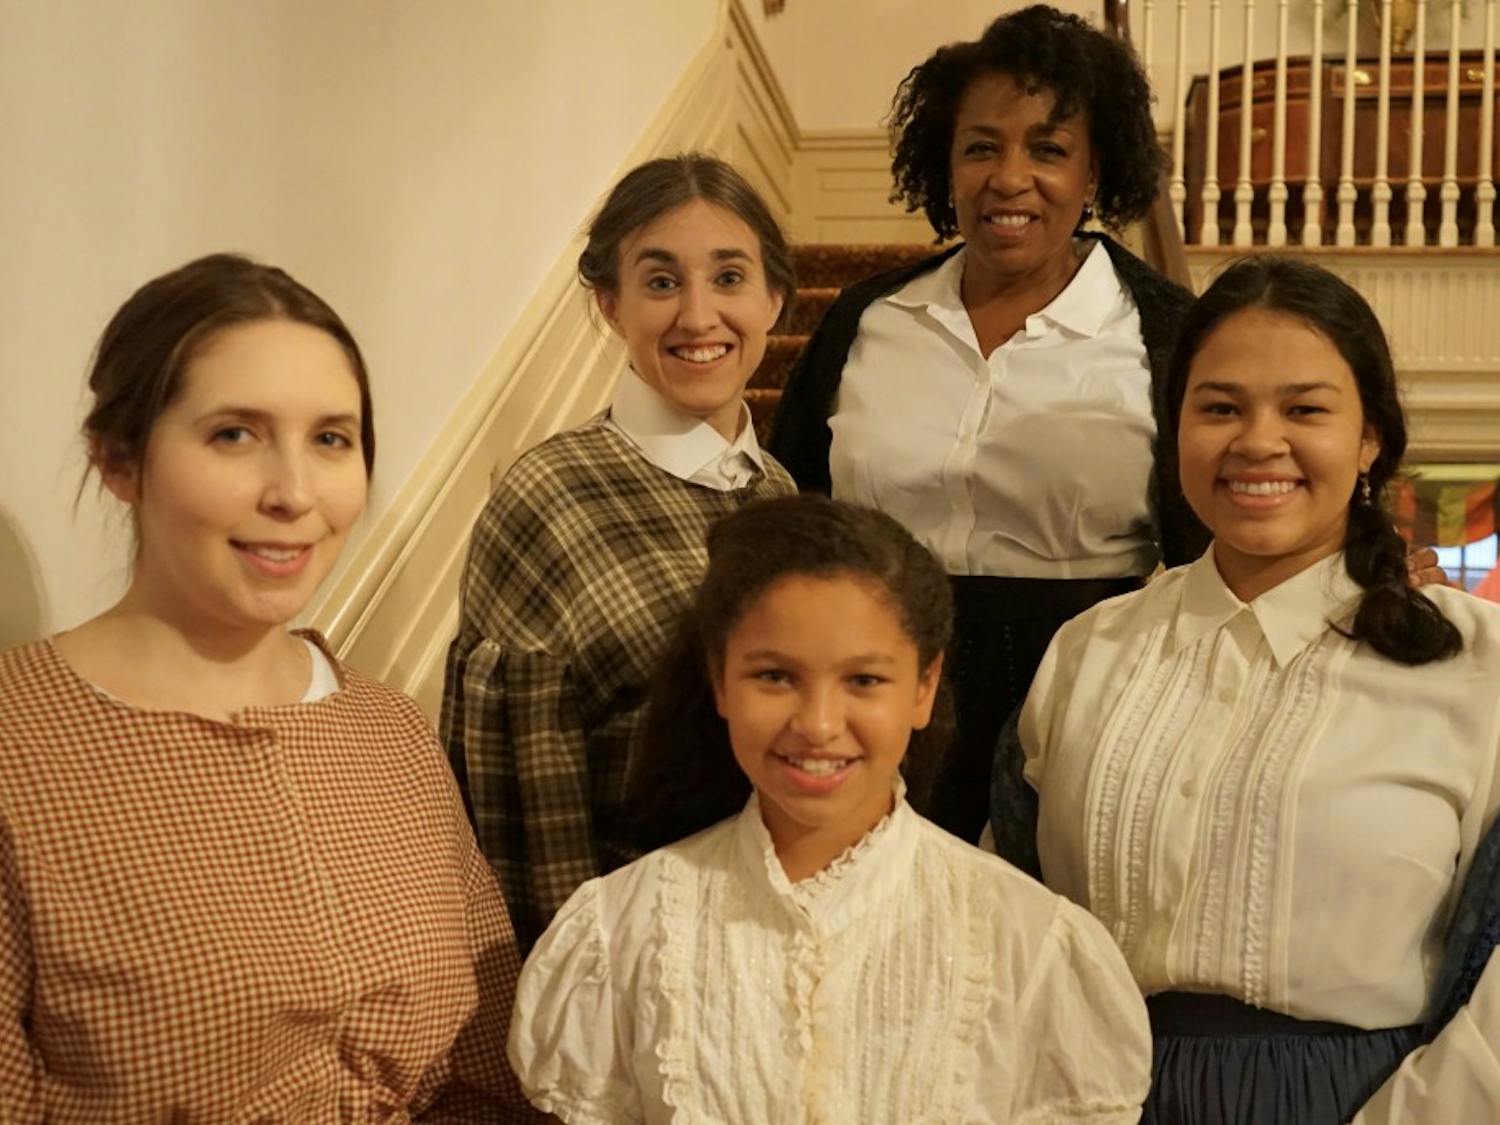 The Women's Theatre Festival is putting on an immersive performance of "Little Women." Photo courtesy of Nick Popio.